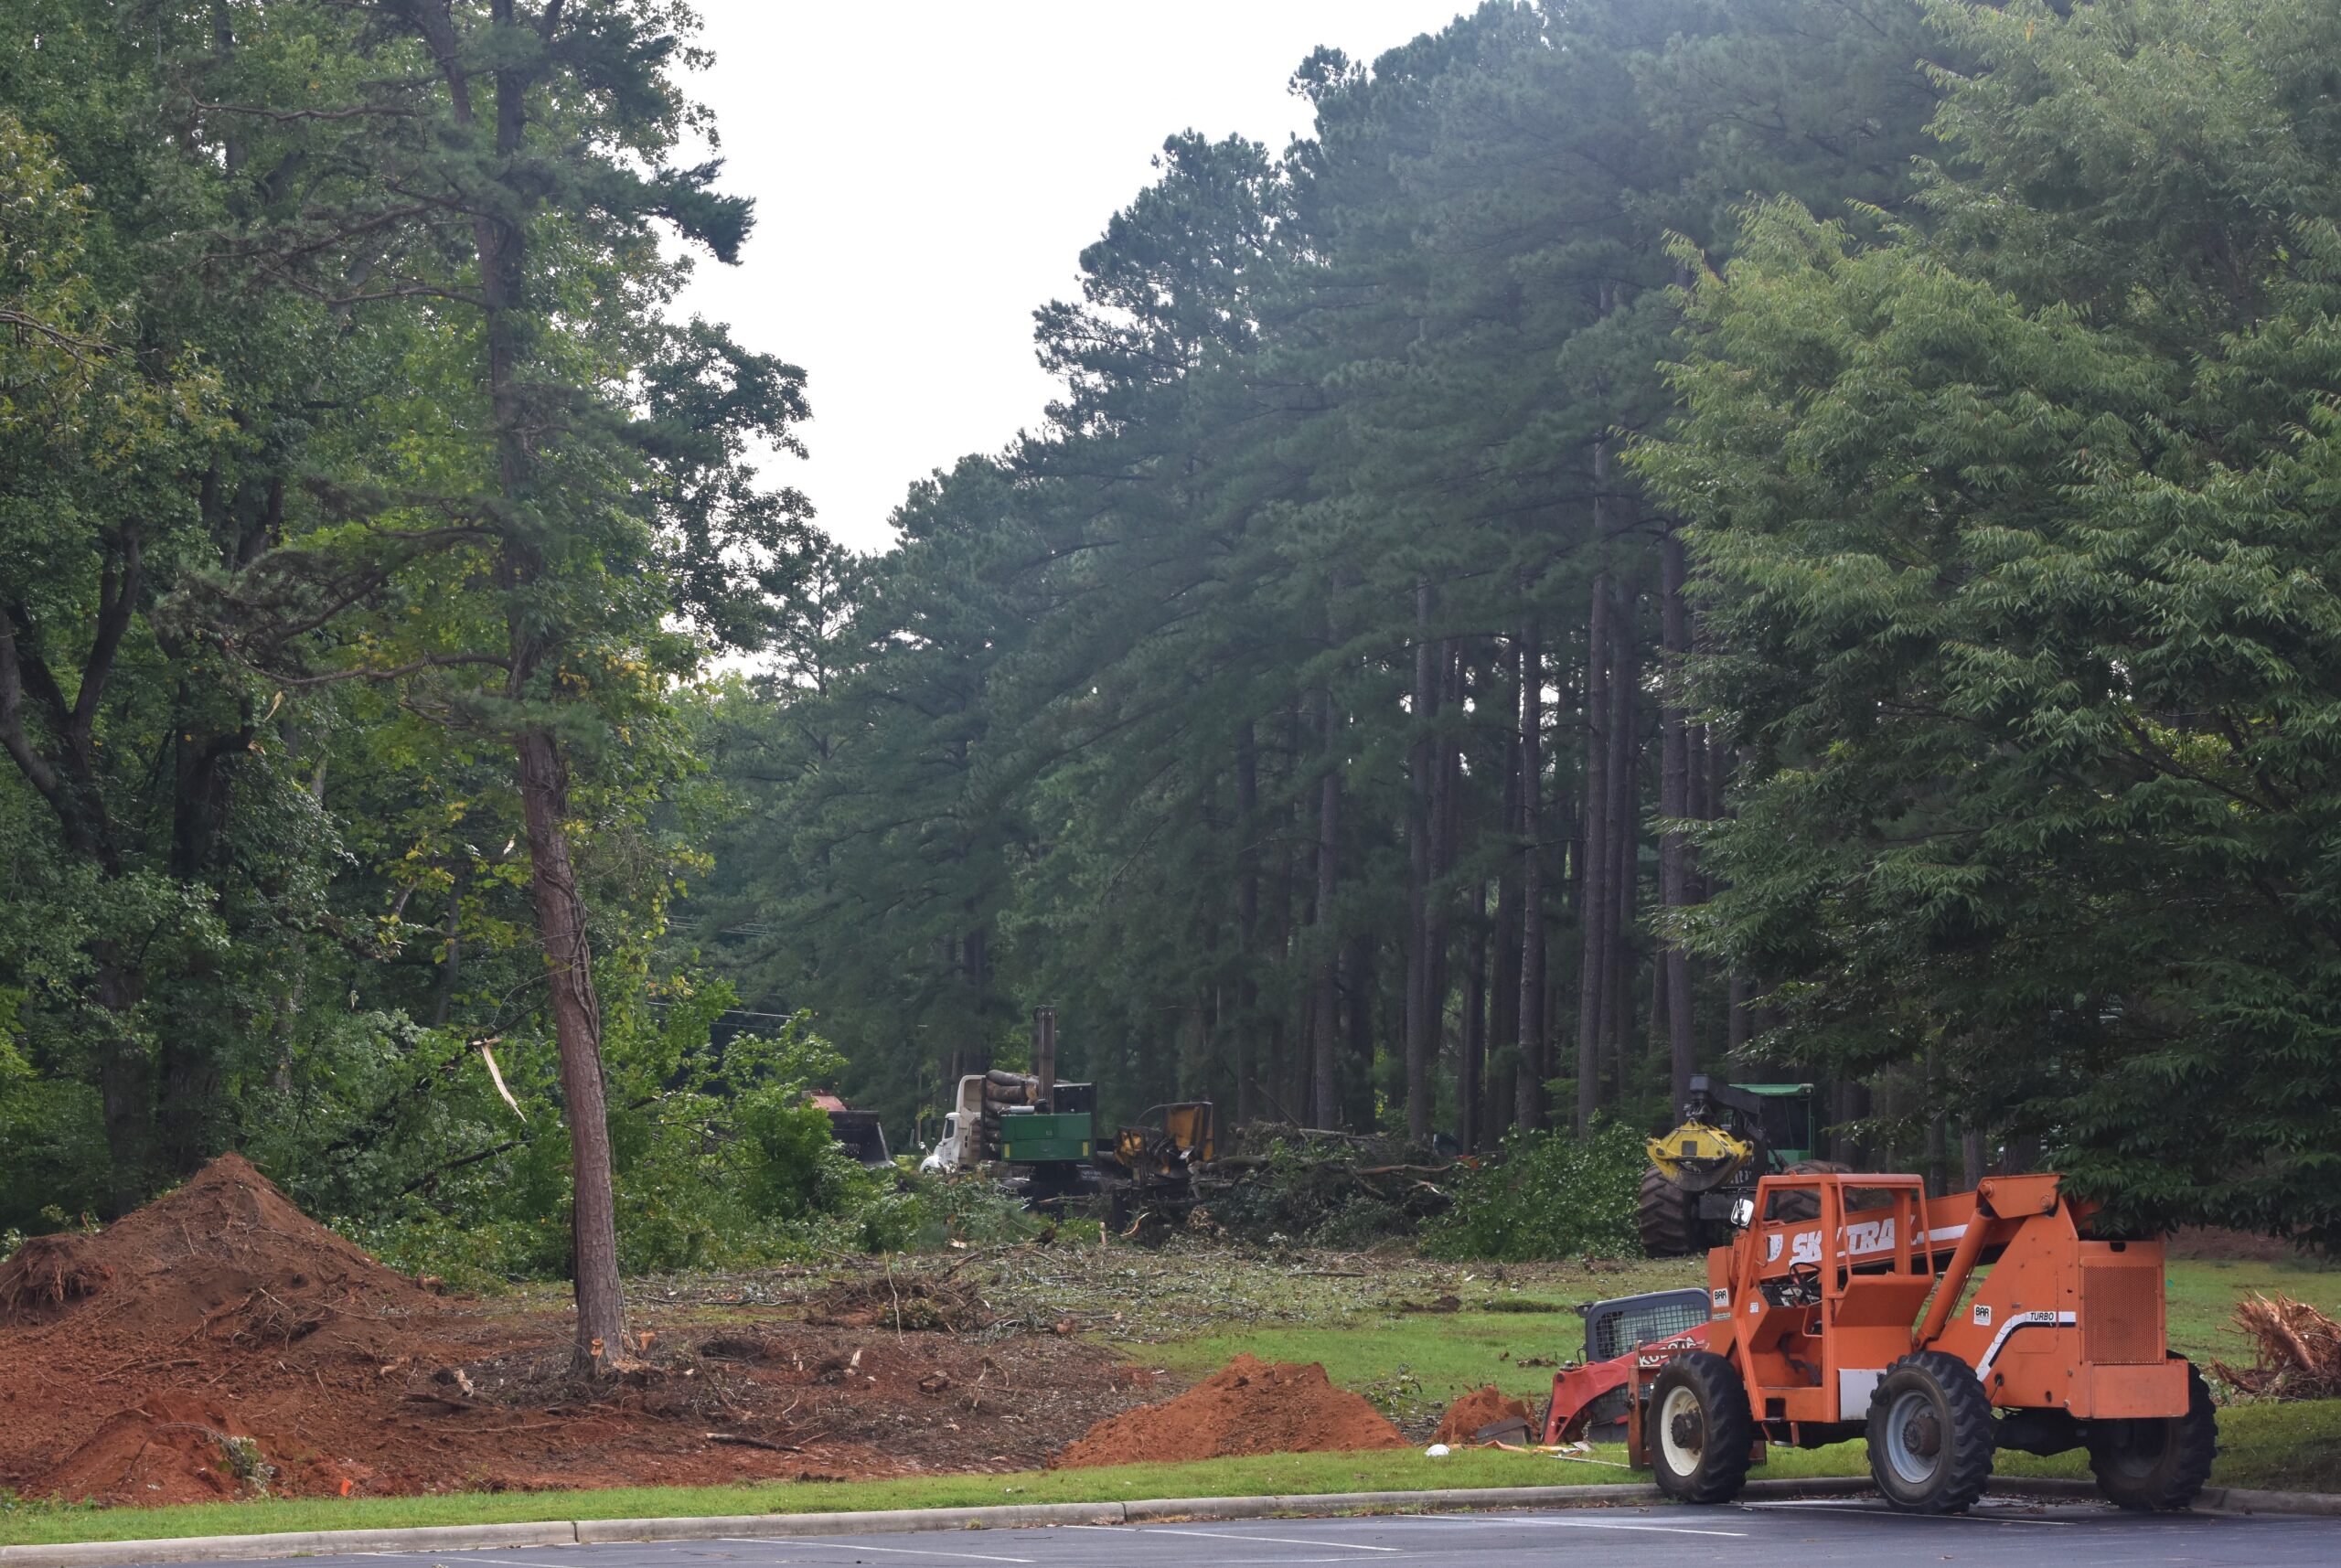 More work, including tree removal, along the clearing toward NC 65, 8/15/2022.